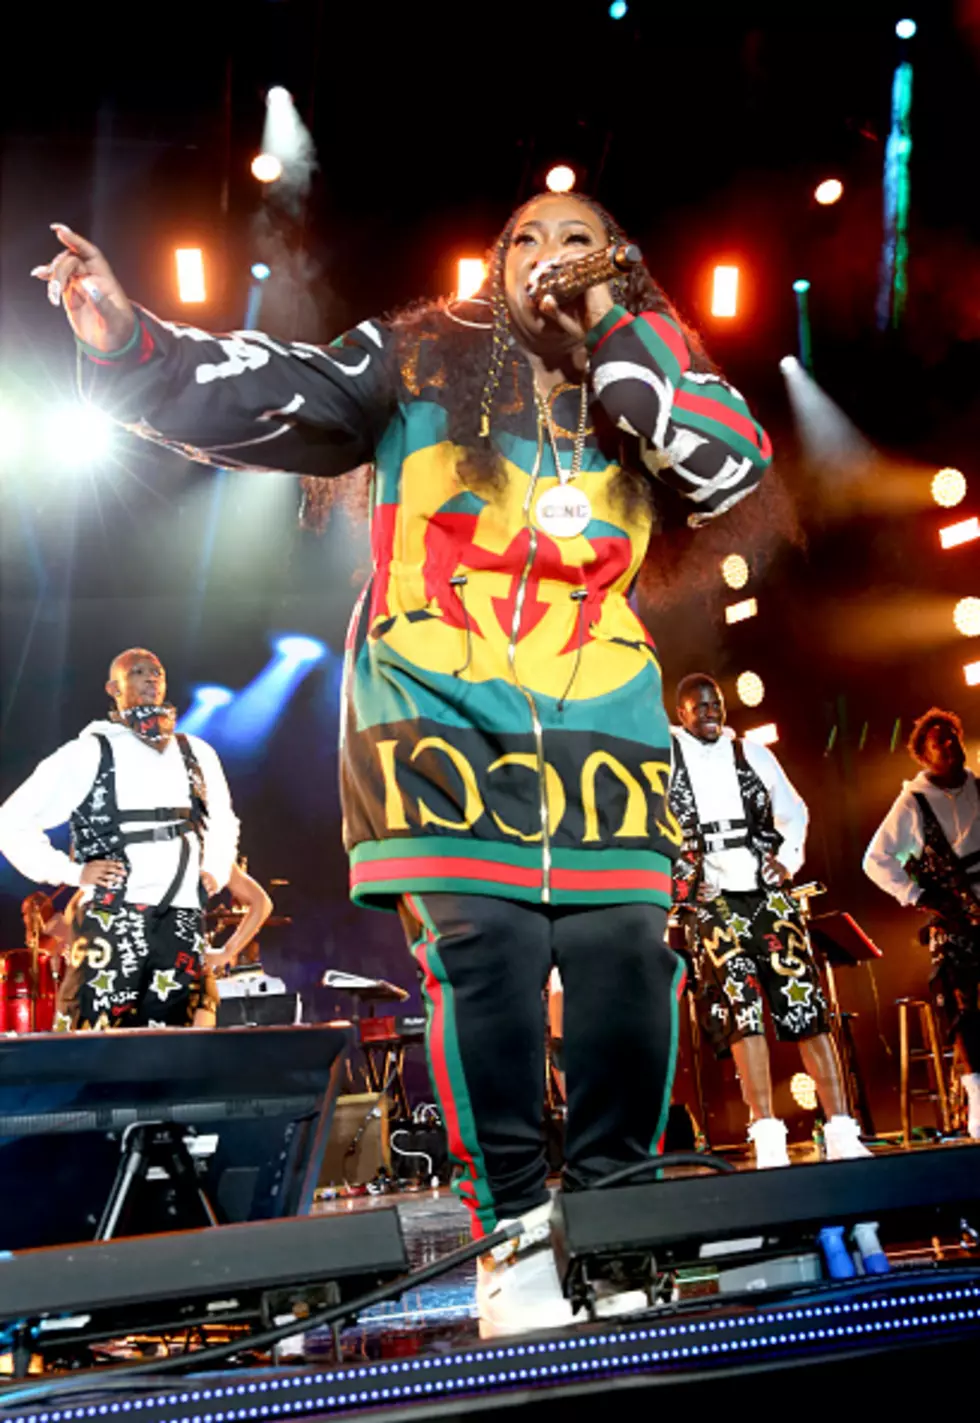 Check out how Missy Elliott Makes History As The First Female Rapper To Be Inducted Into..